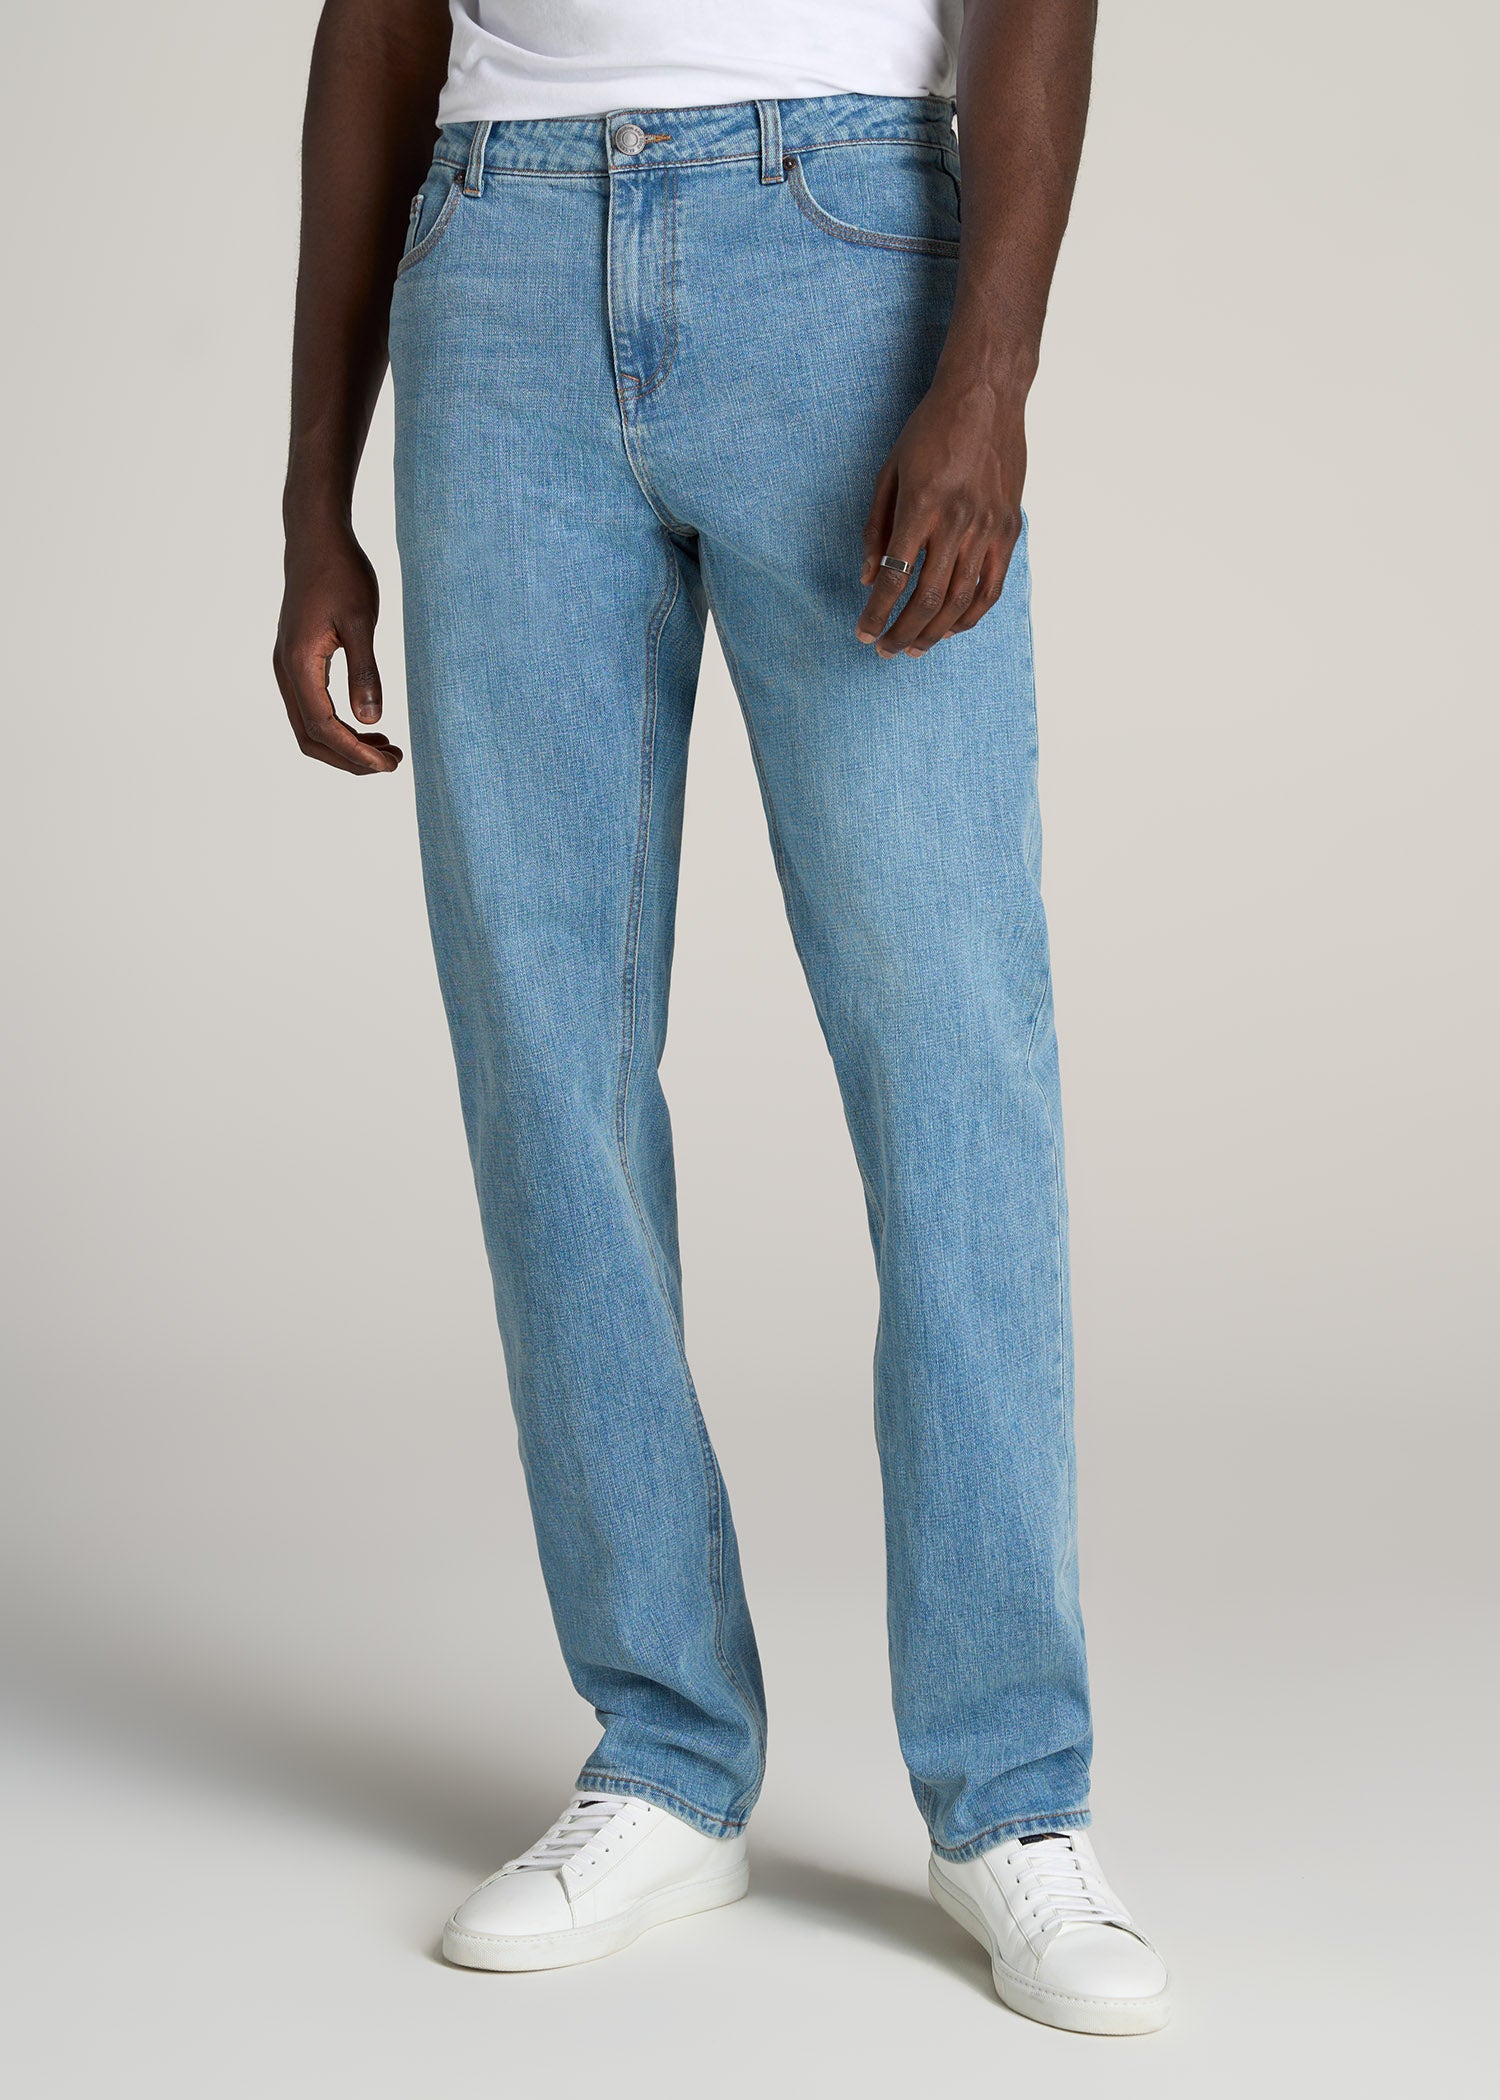 Big and Tall 14 Ounce All Cotton Baggy Jeans with